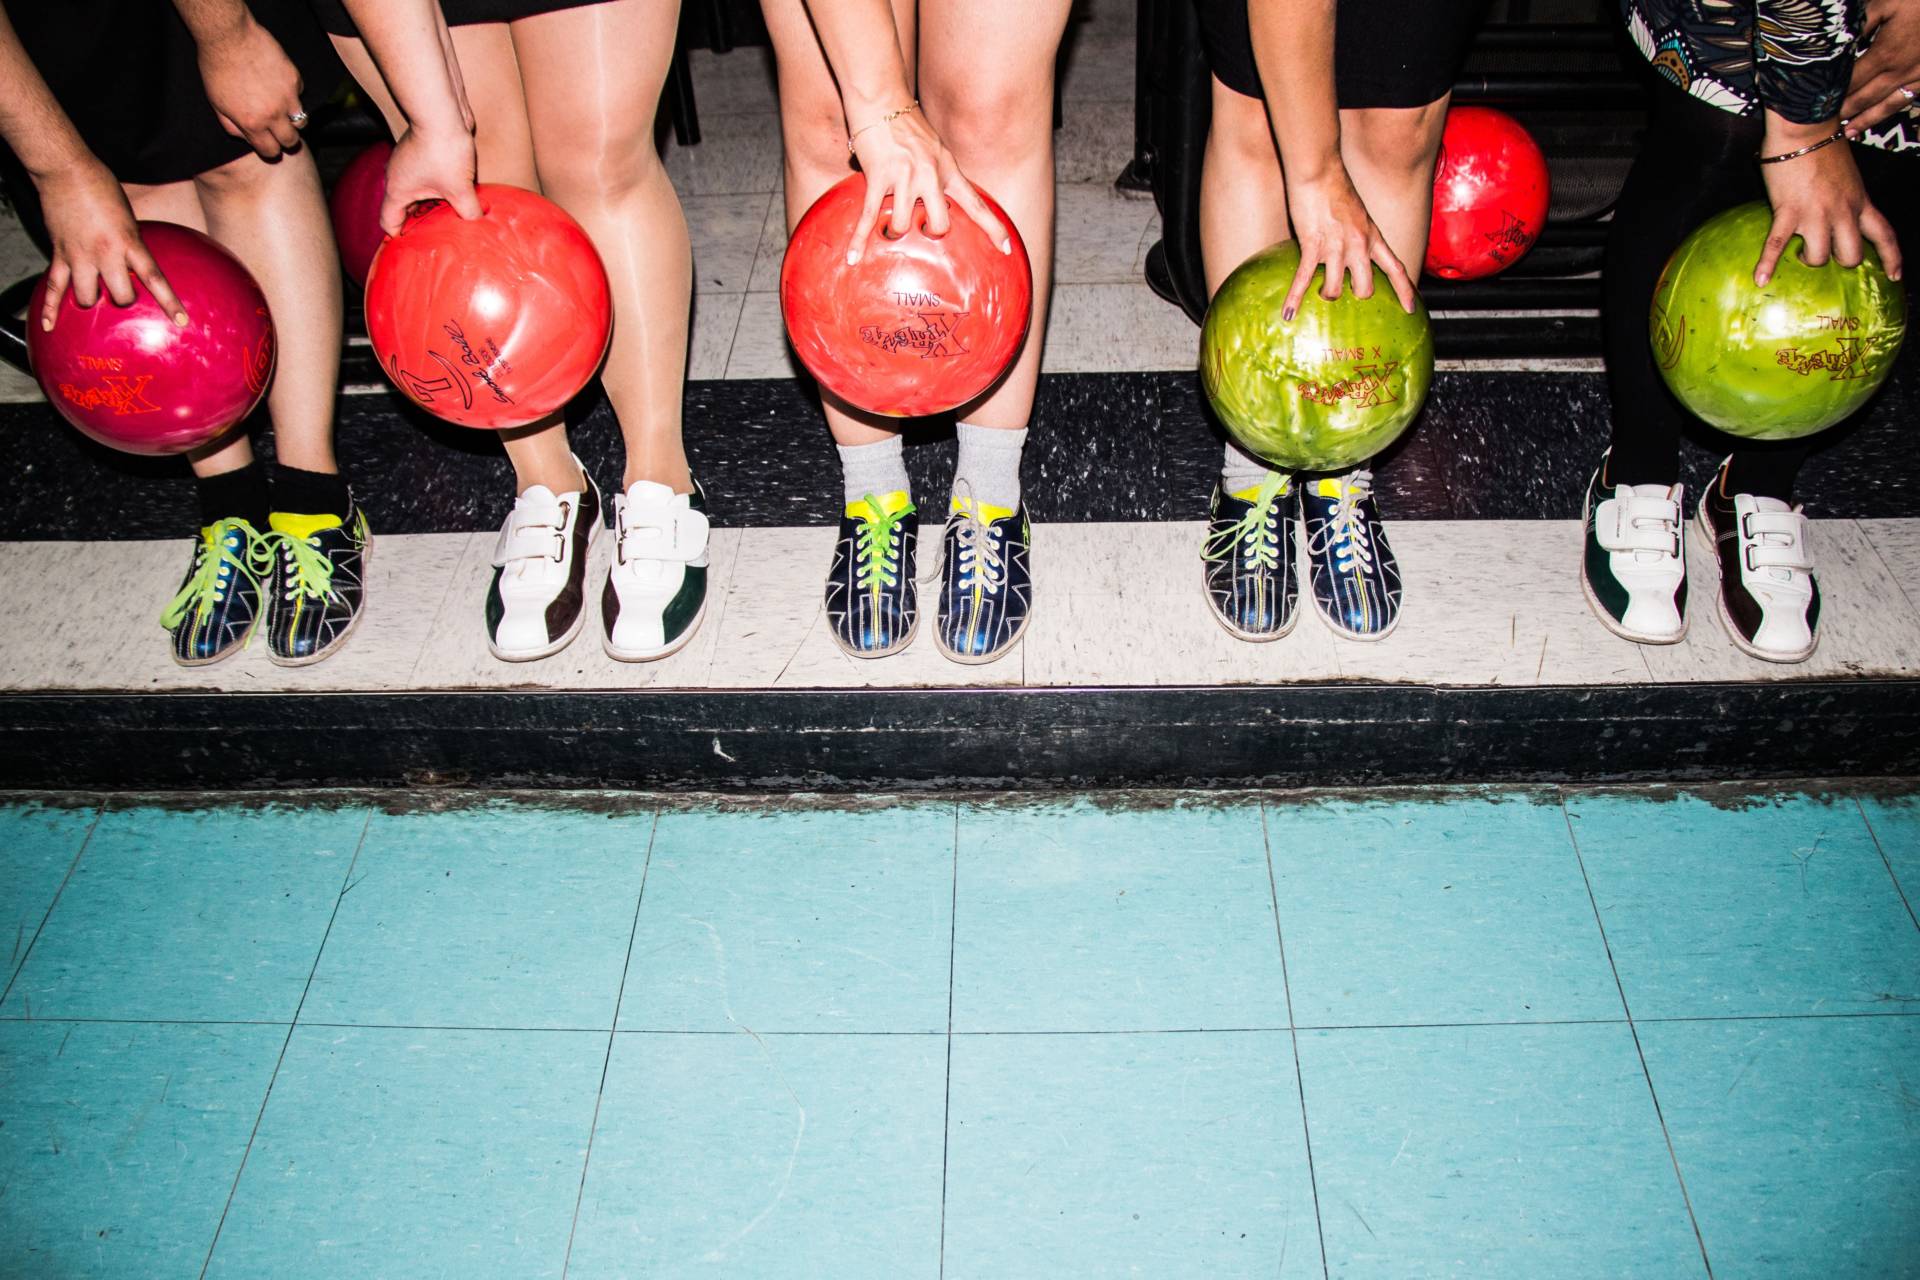 people stood in a line holding bowling balls